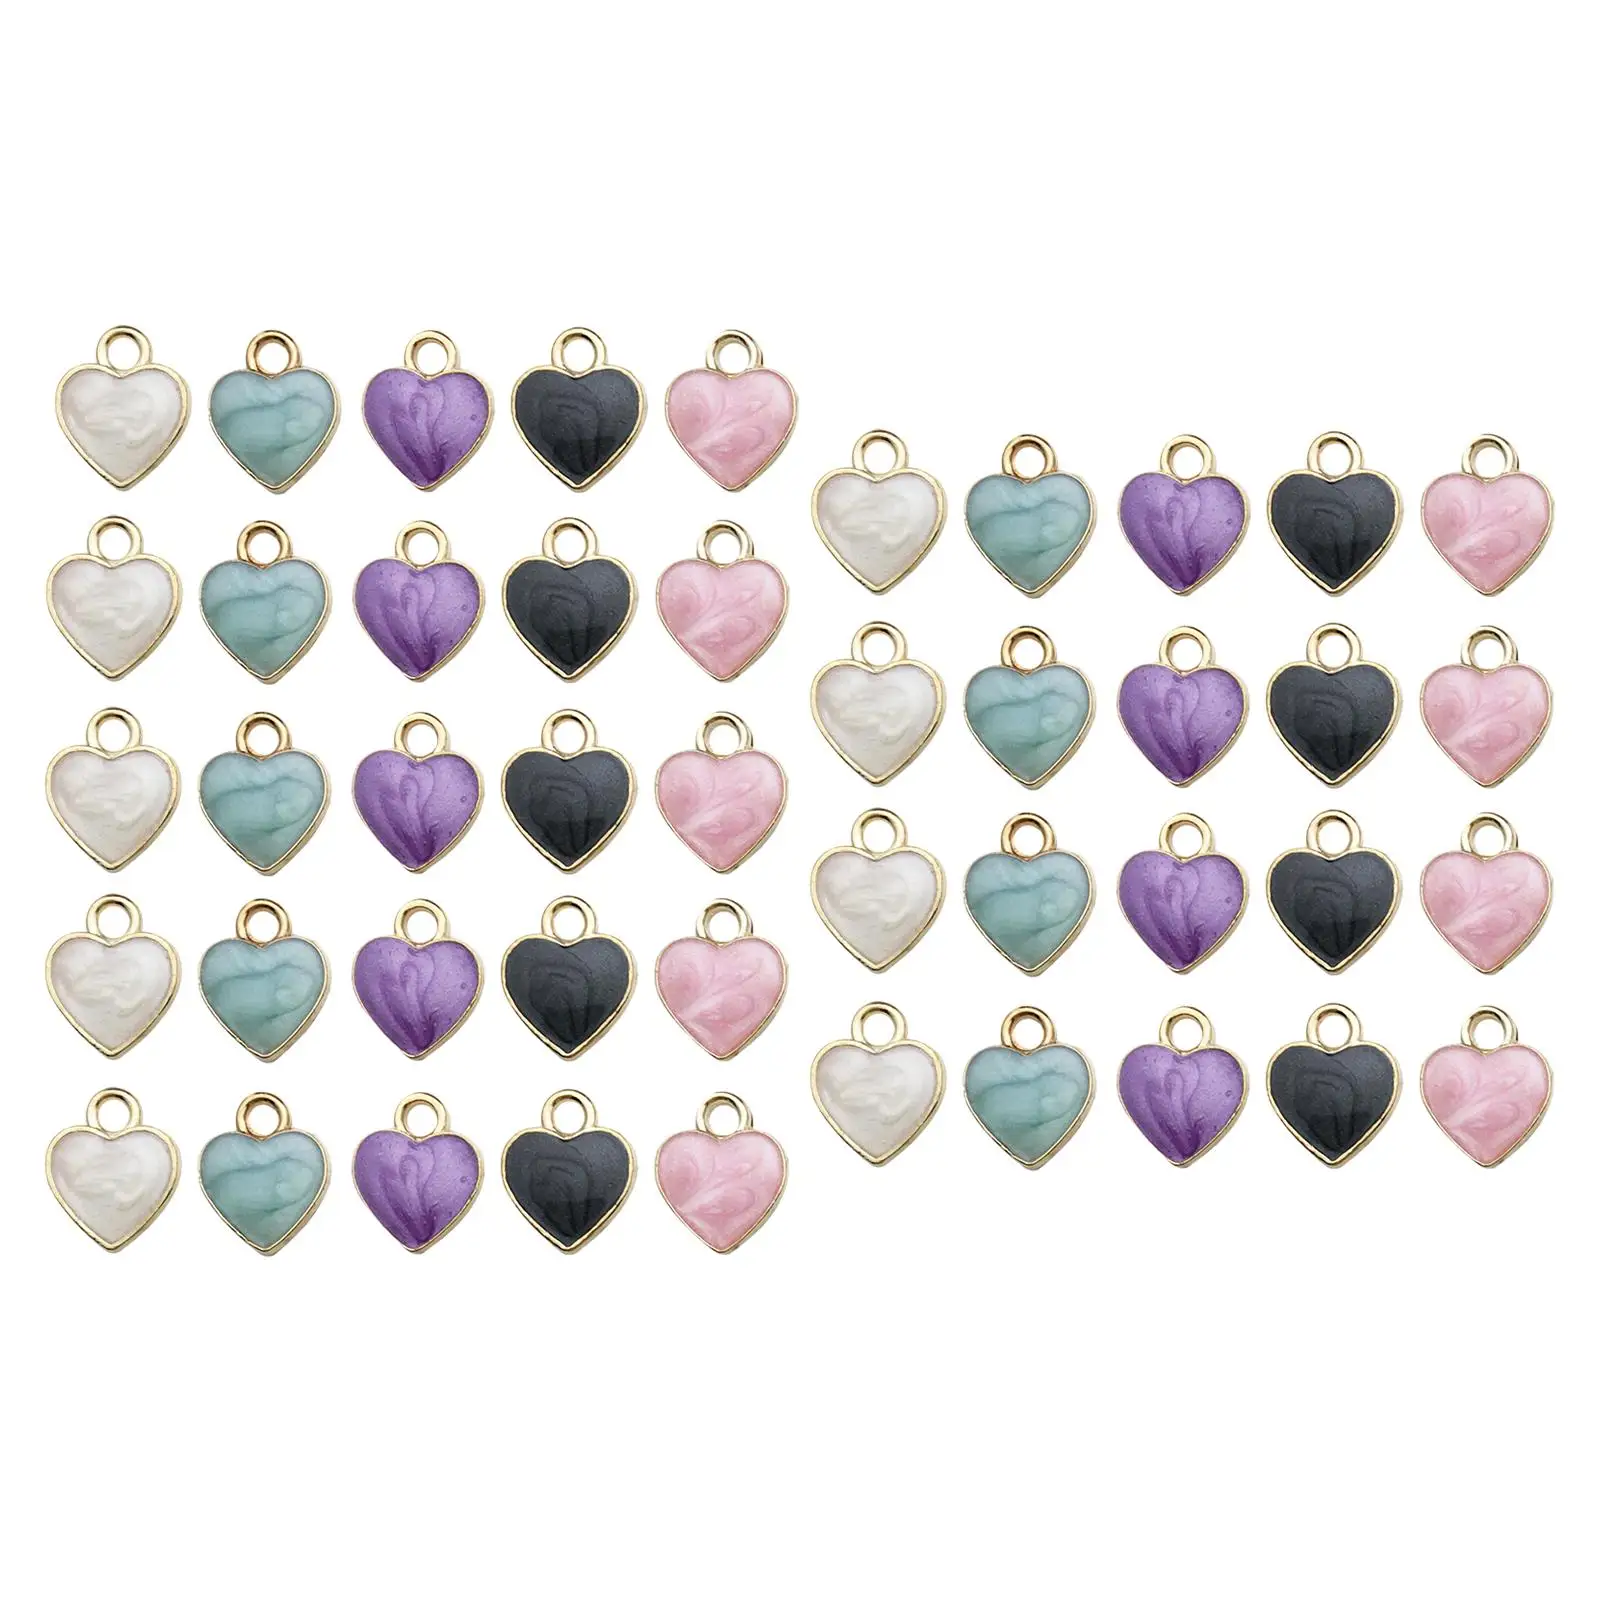 50x Heart Charms Jewelry Making Finding Necklace Bracelet Earring Mini Valentine`s Gifts for Teachers Toddlers Pets Mom Students